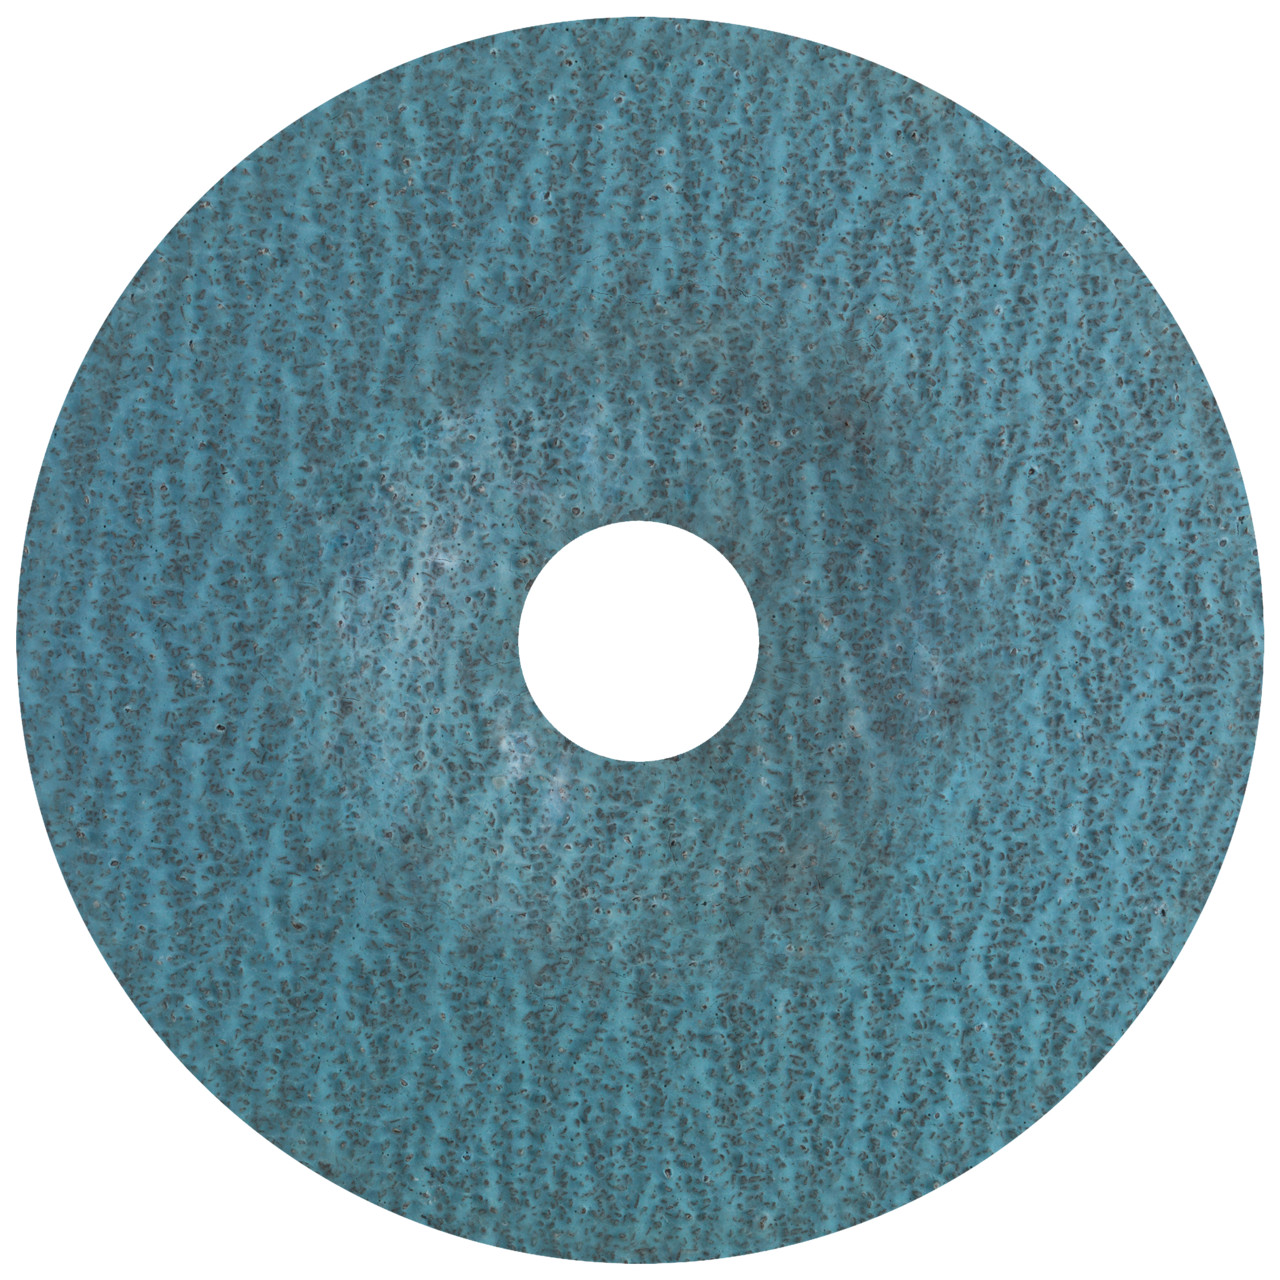 Tyrolit ZA-P48 N NATURAL FIBRE DISC DxH 115x22 For steel and stainless steel, P60, form: DISC, Art. 205056